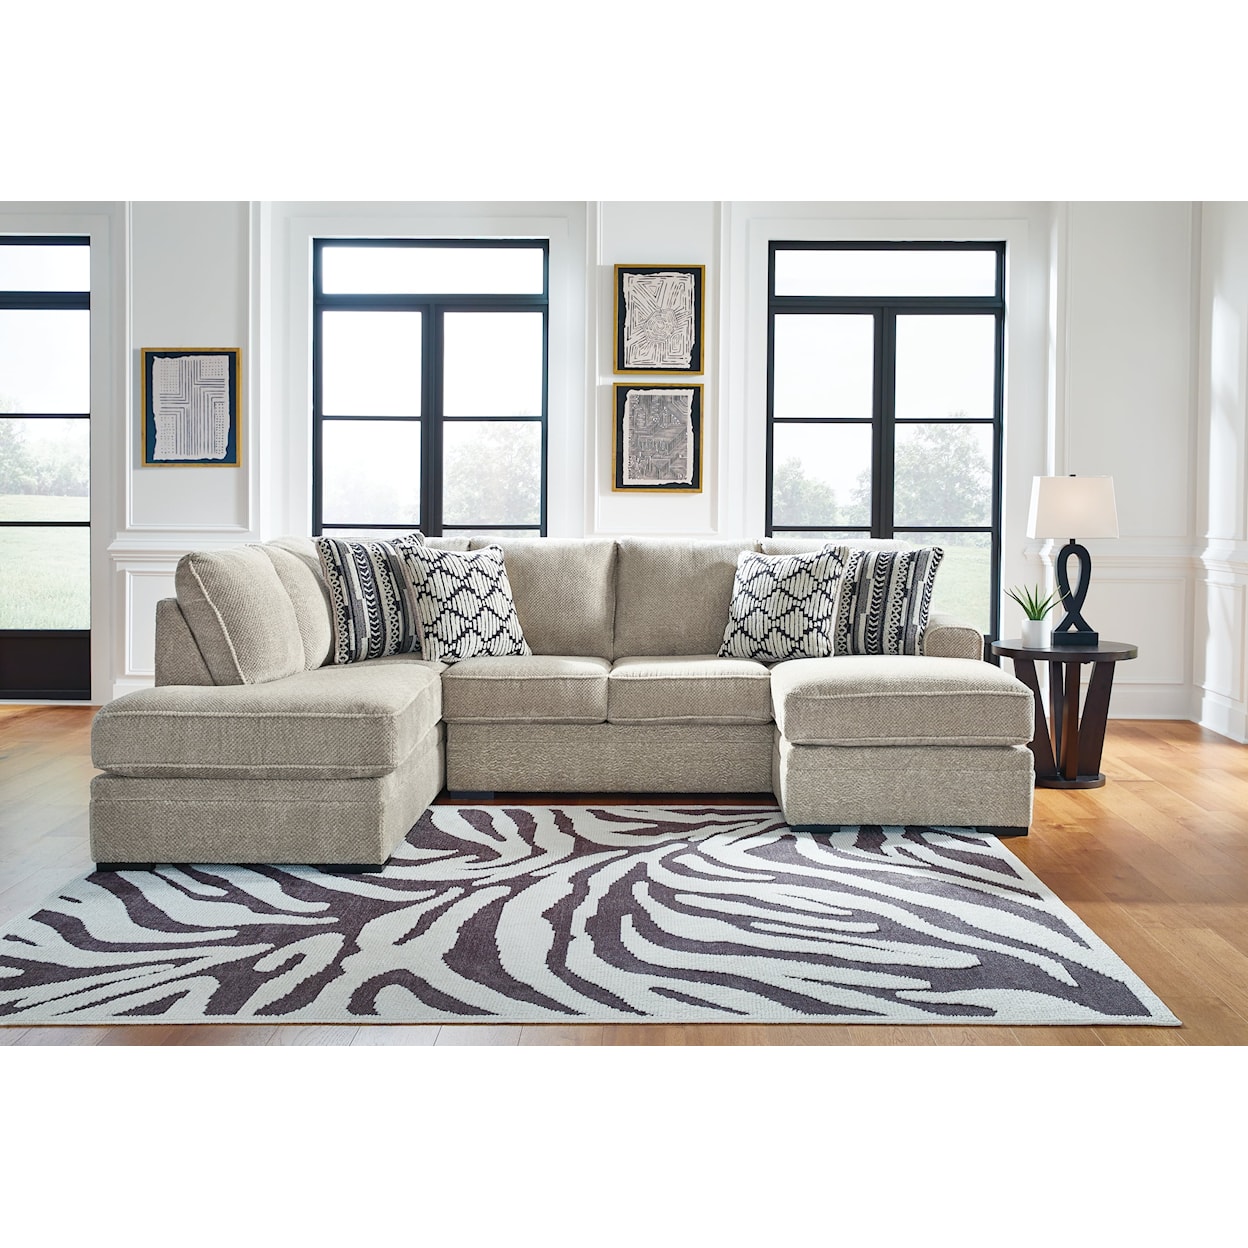 JB King Calnita Sectional with 2 Chaises